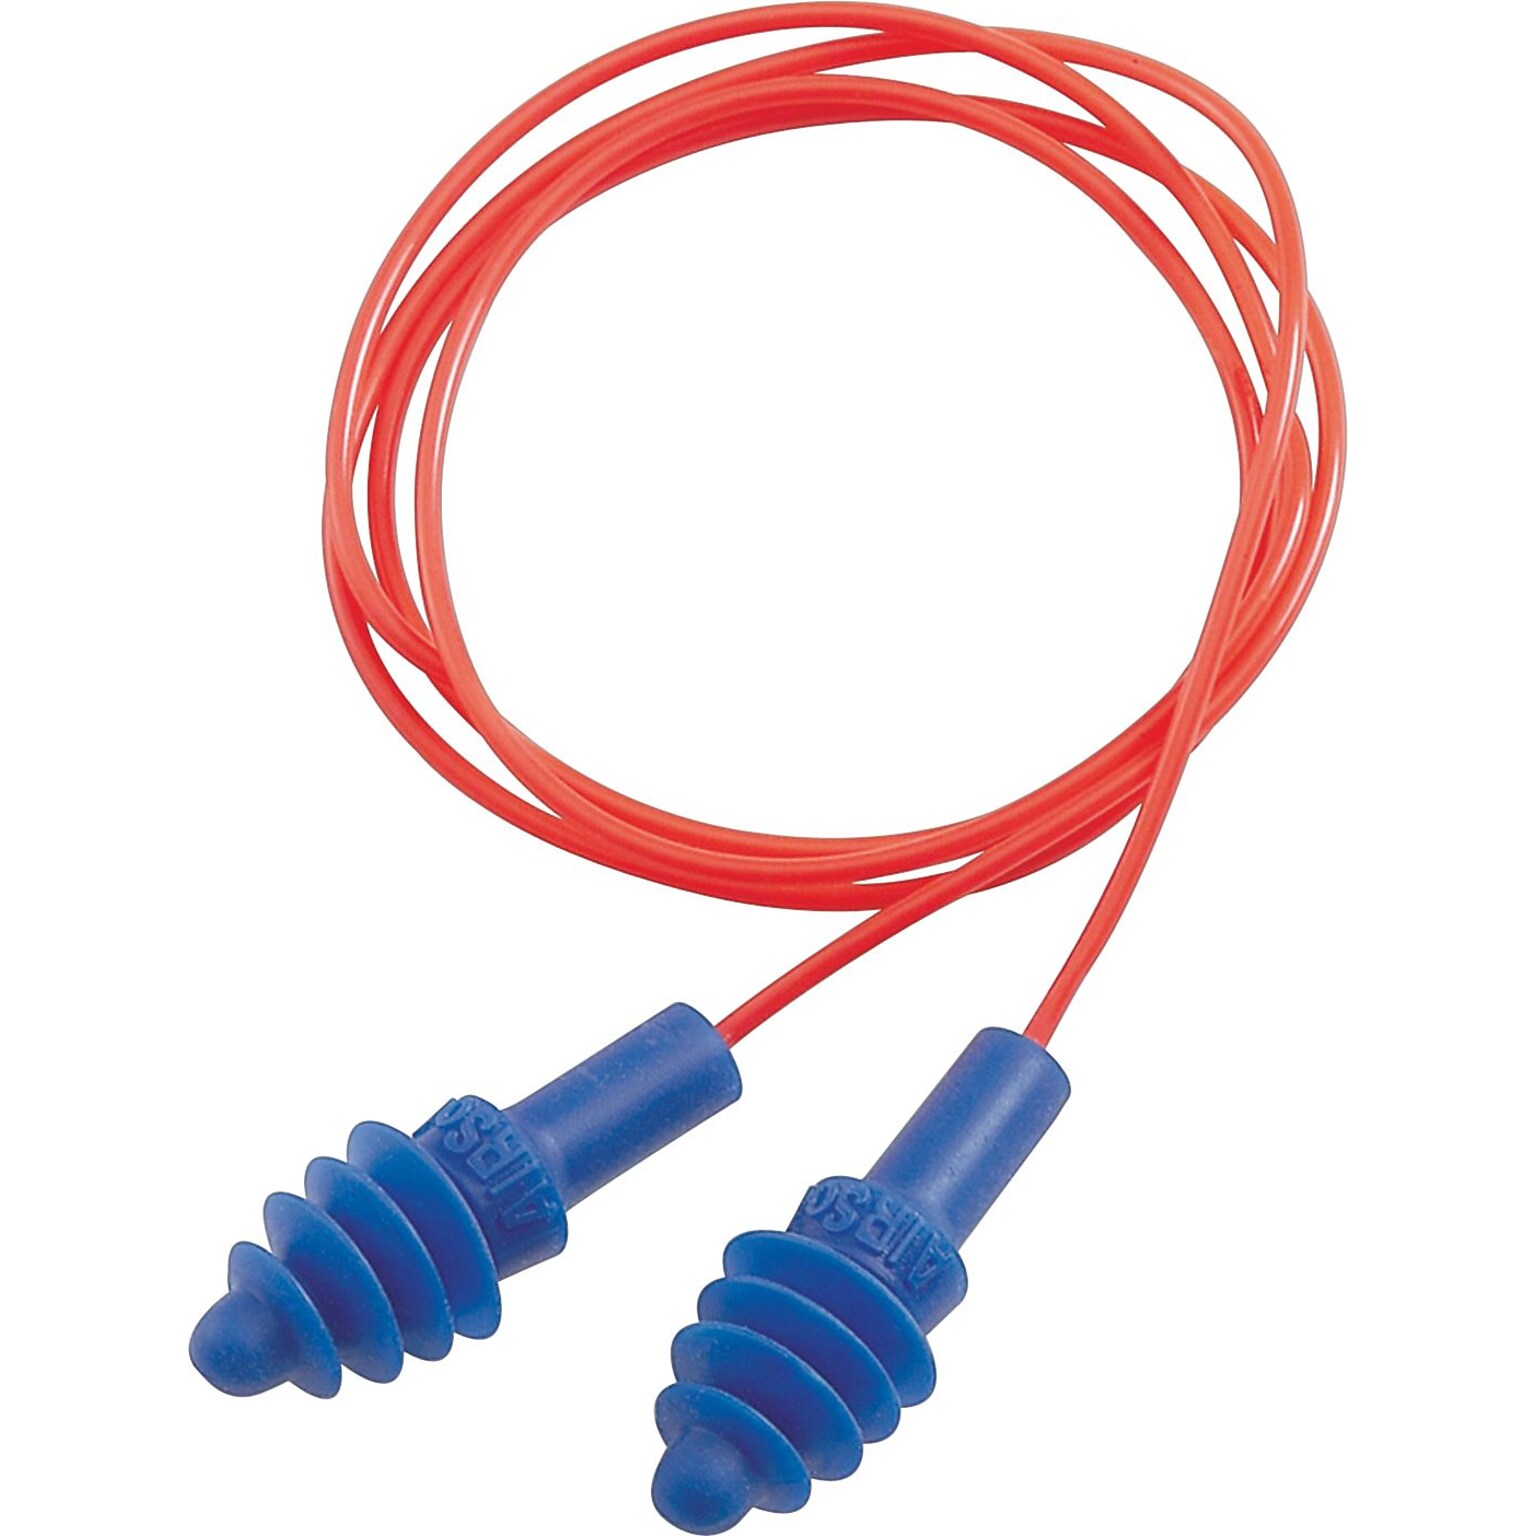 Howard Leight® AirSoft® Red Poly Cord Reusable Earplugs, Blue, 27 dB, 100/BX